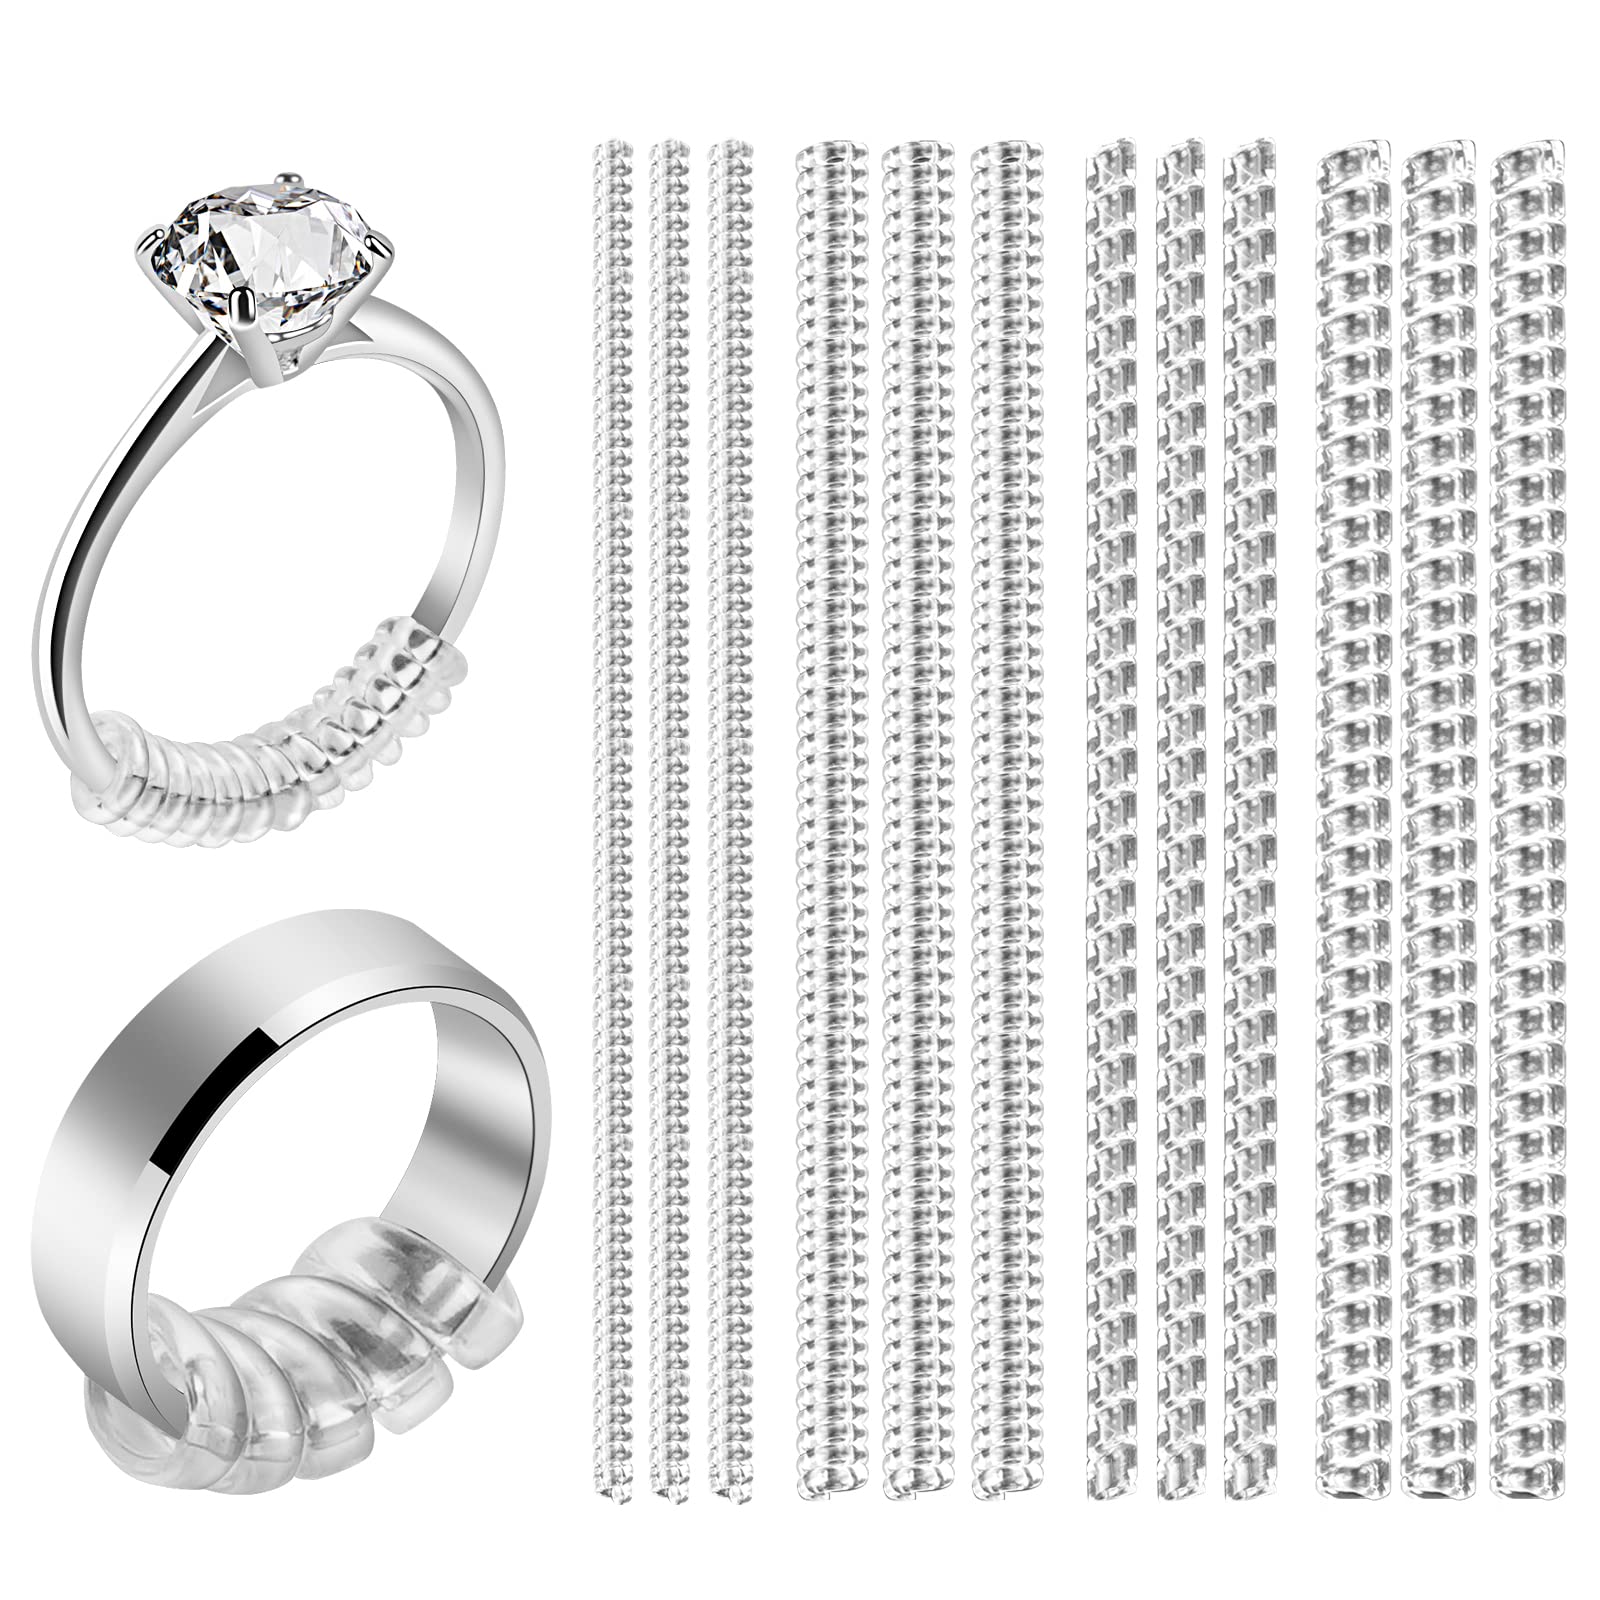 ARCUAT Ring Sizer Adjuster for Loose Rings 12 Pack 4 Sizes Invisible Clear  Silicone Ring Guard for Women Men Ring Resizer Tightener Spacer Fitter for Too  Big Ring Make Ring Smaller without Resizing